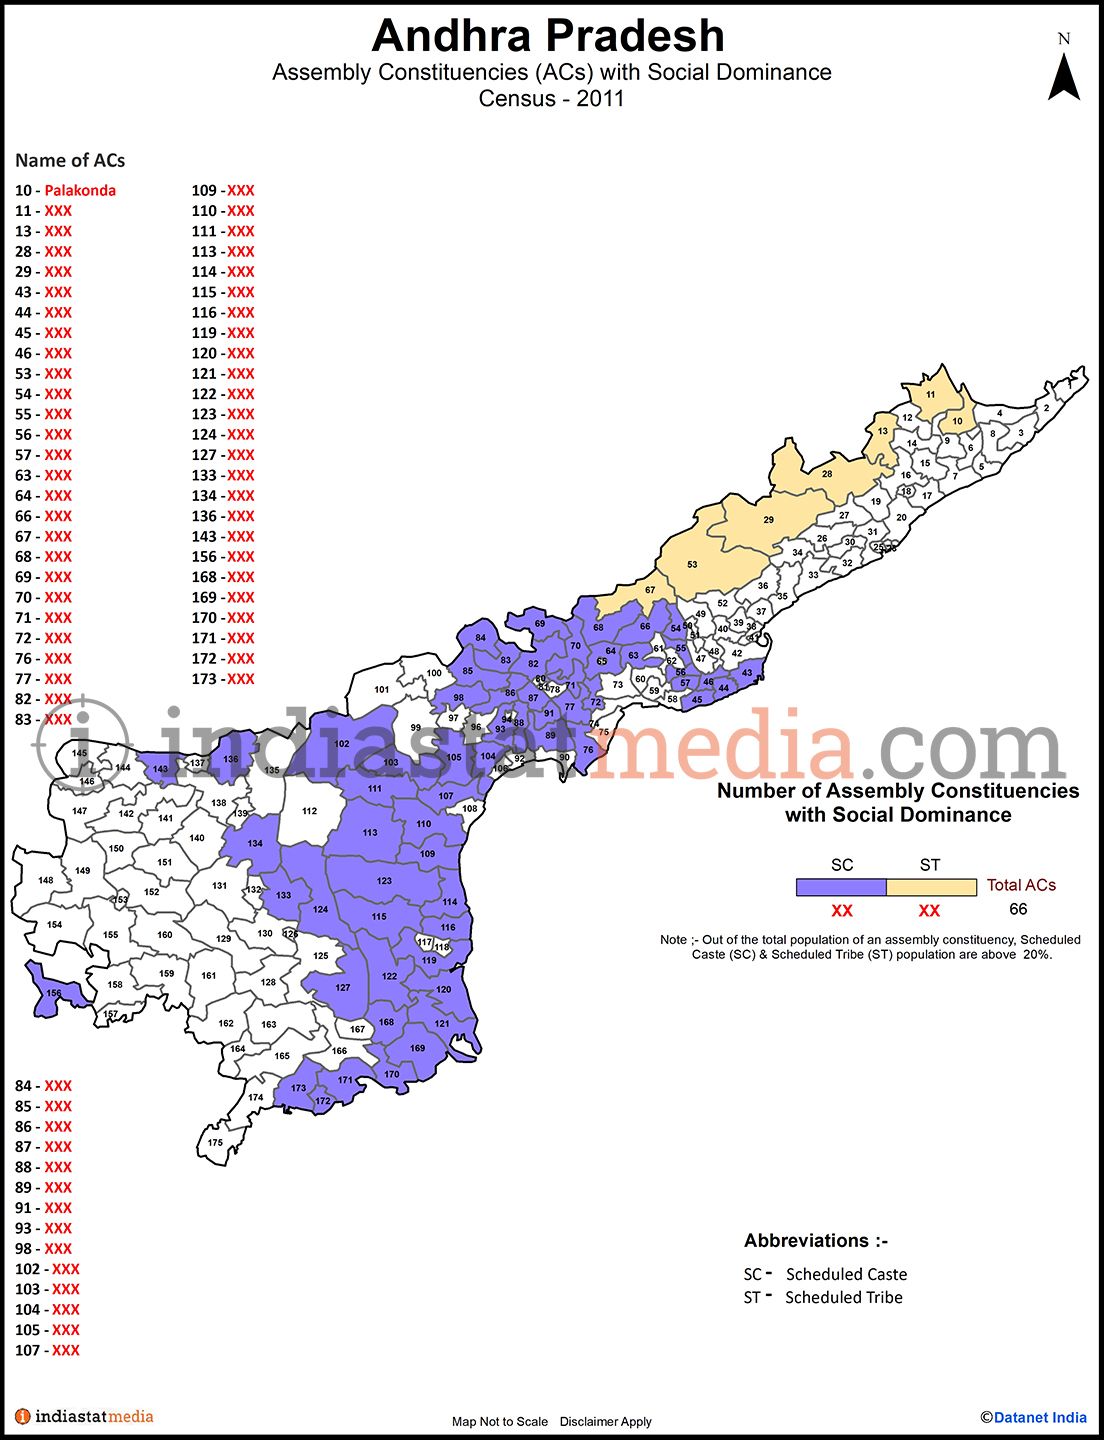 Assembly Constituencies with Social Dominance in Andhra Pradesh - Census 2011